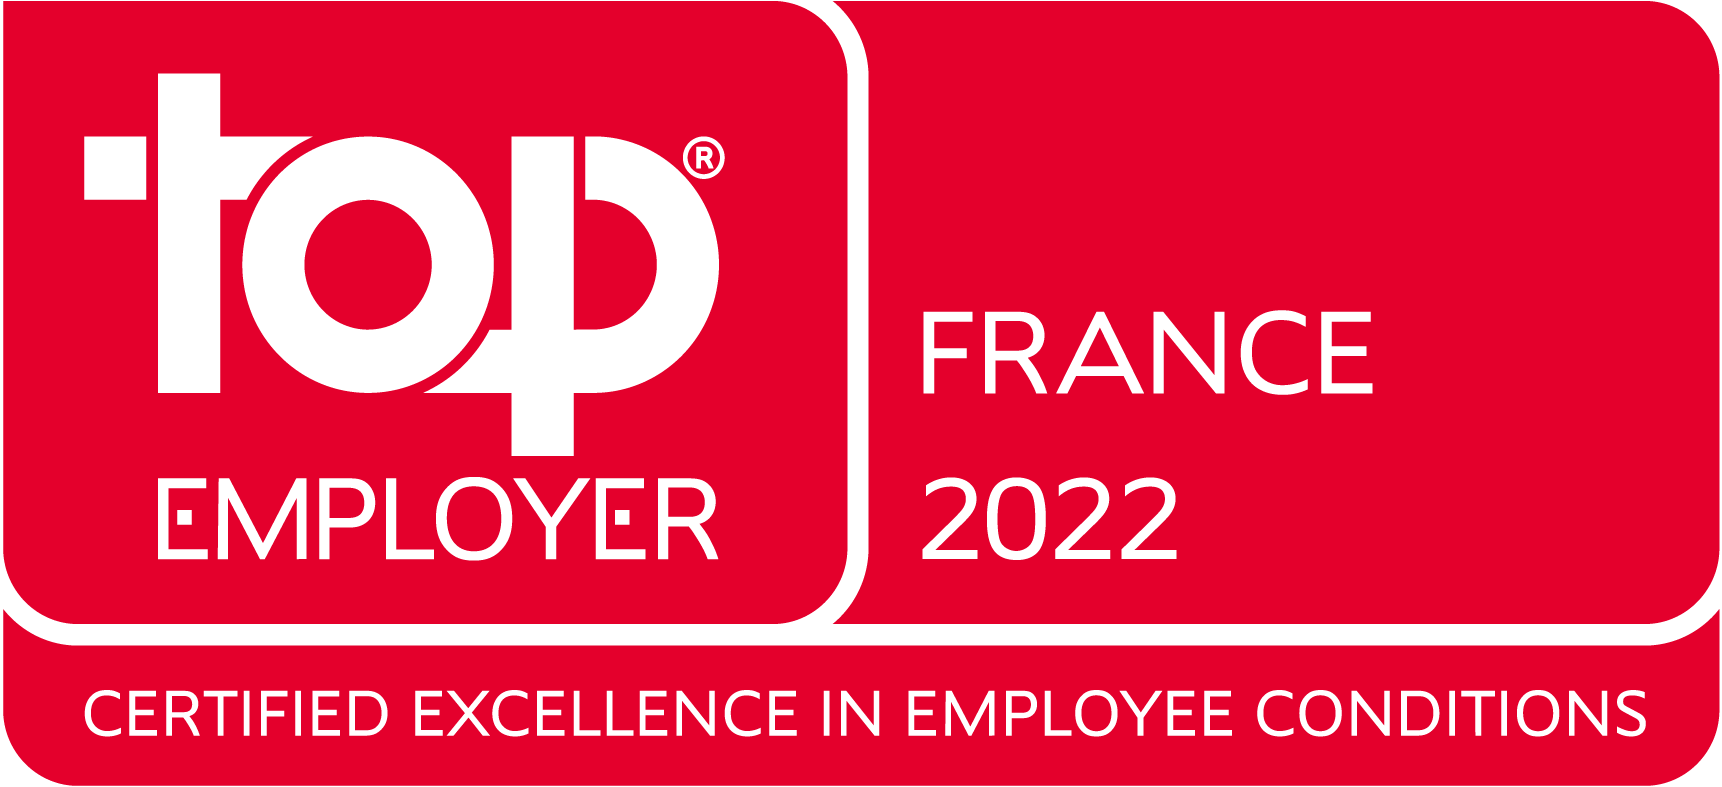 Top_Employer_France_2022 1.png